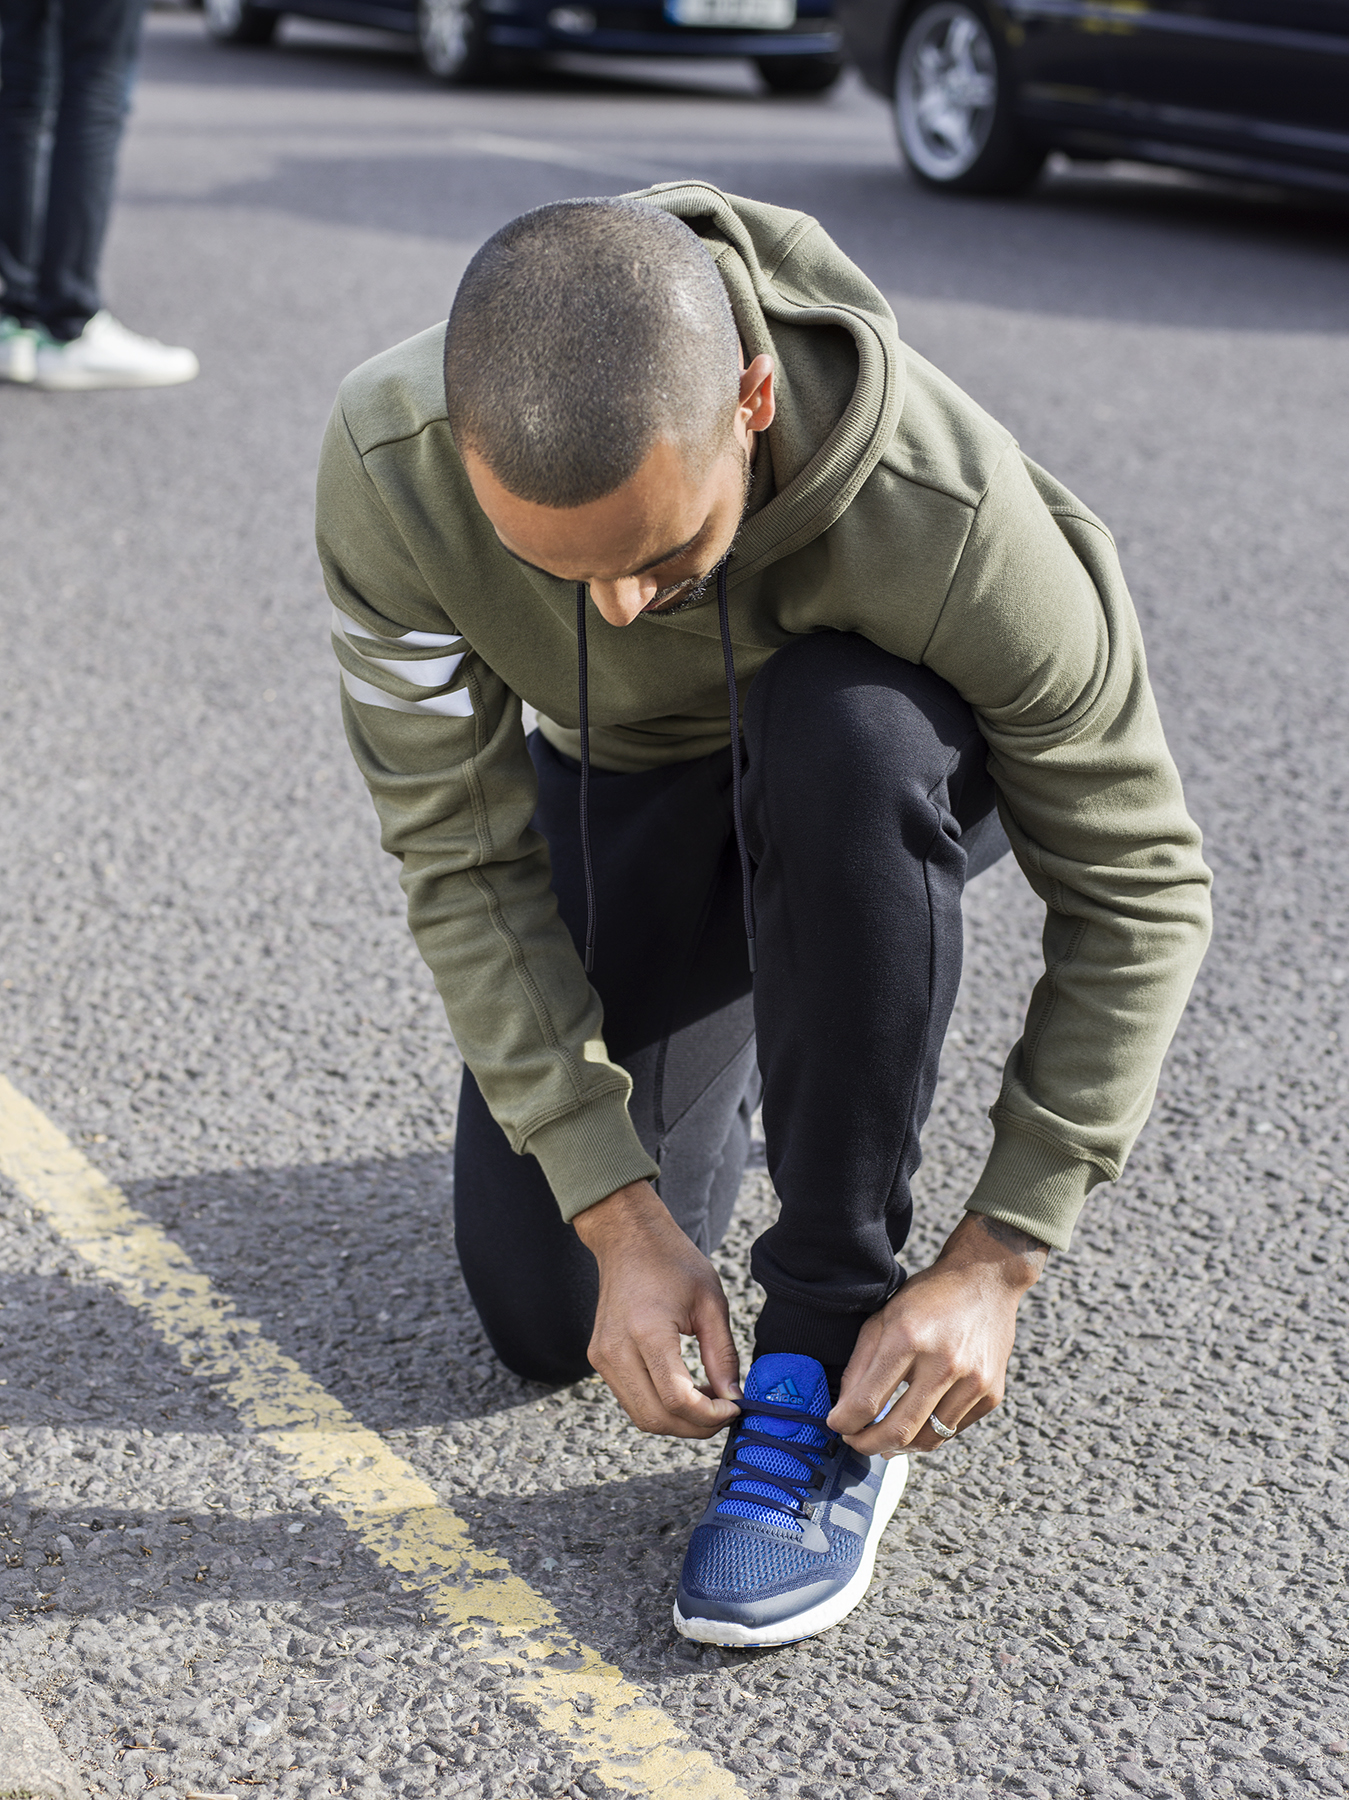 gritar Pagar tributo Importancia Sponsored: adidas And Foot Locker Team Up For 'In The Sneakers of Walcott'  | Fashion News - Conversations About HER